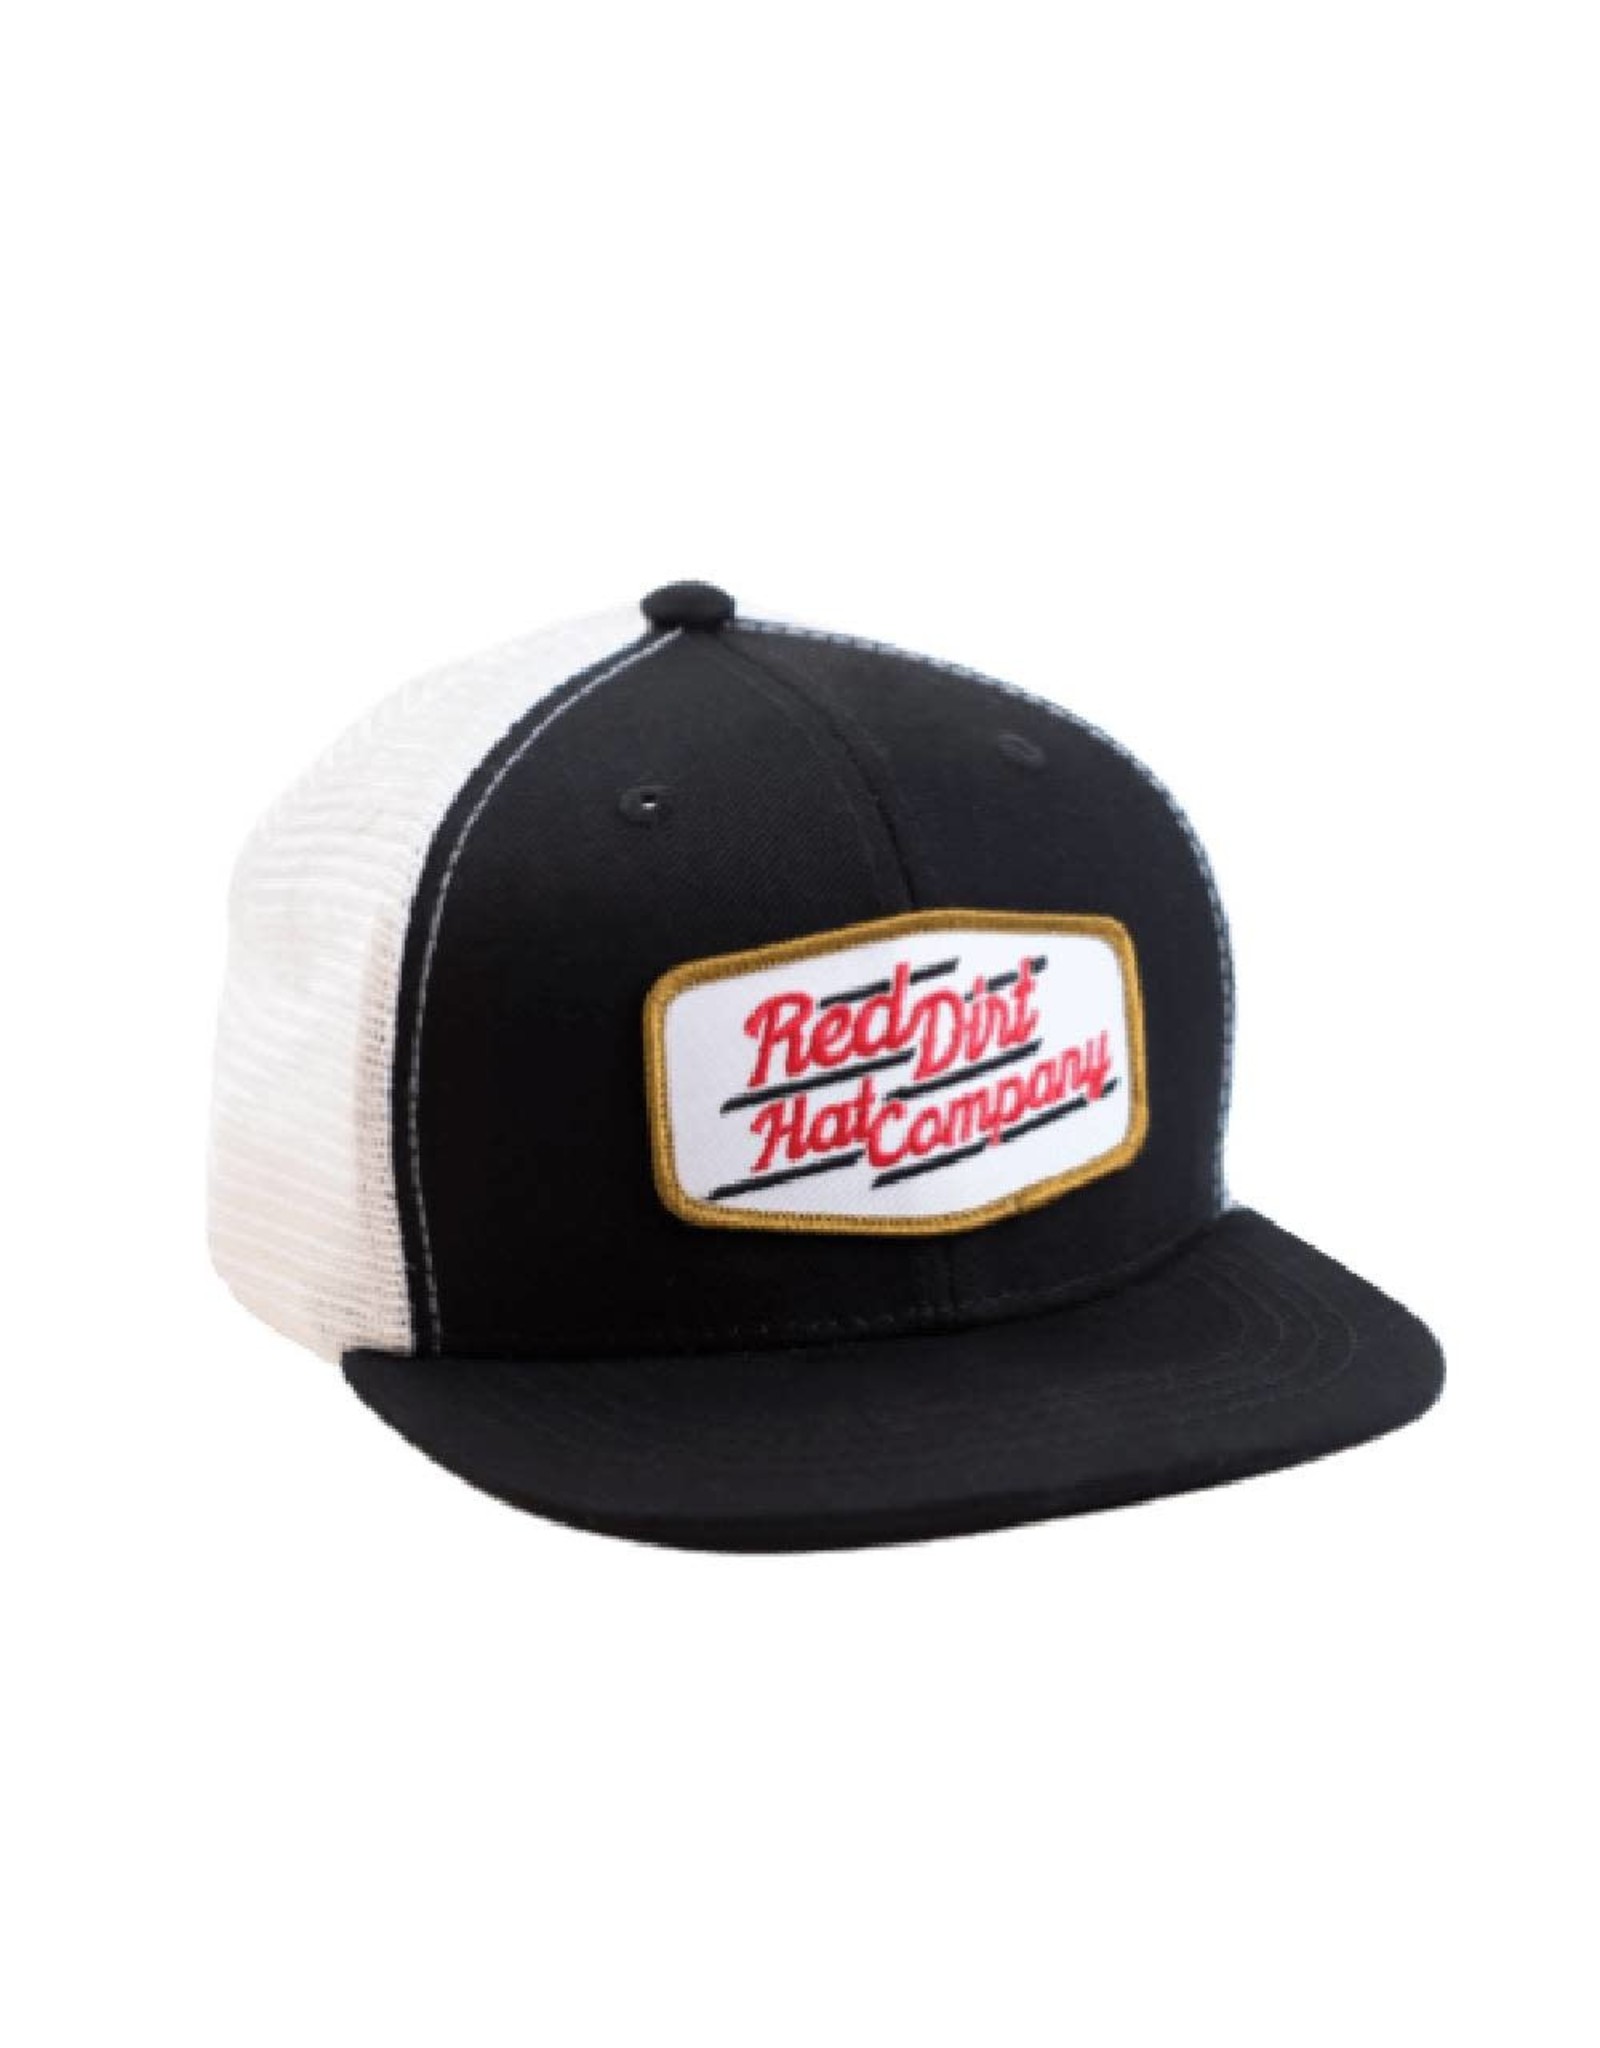 Red Dirt Hat Company Red Dirt Hat Co. Buckle Hat RDHCY21 Cap